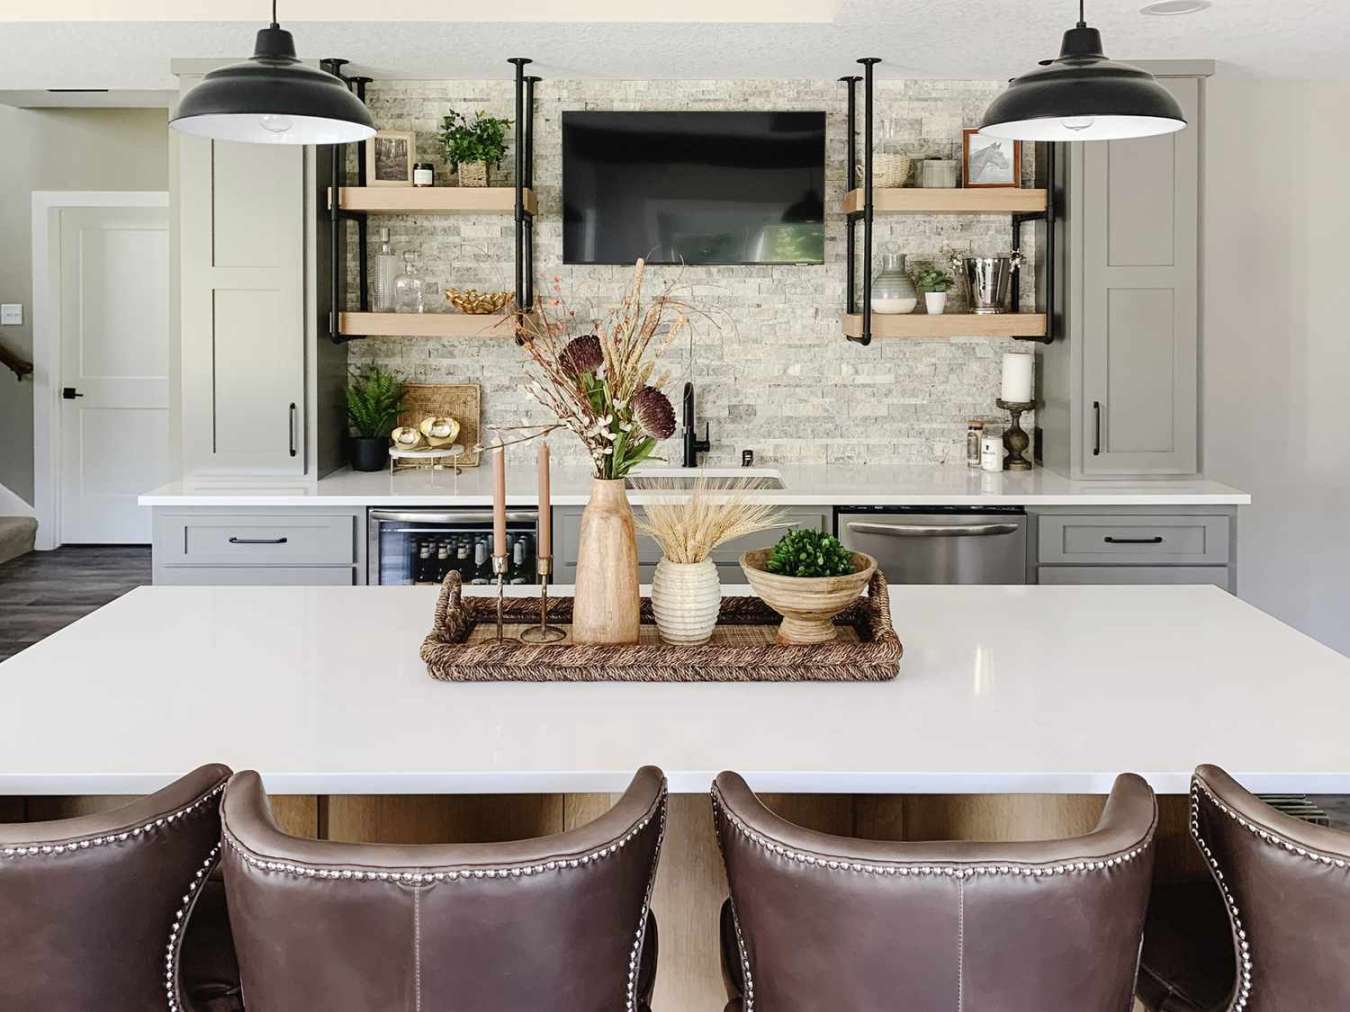 Guide to Kitchen Island Centerpiece Ideas and Styling